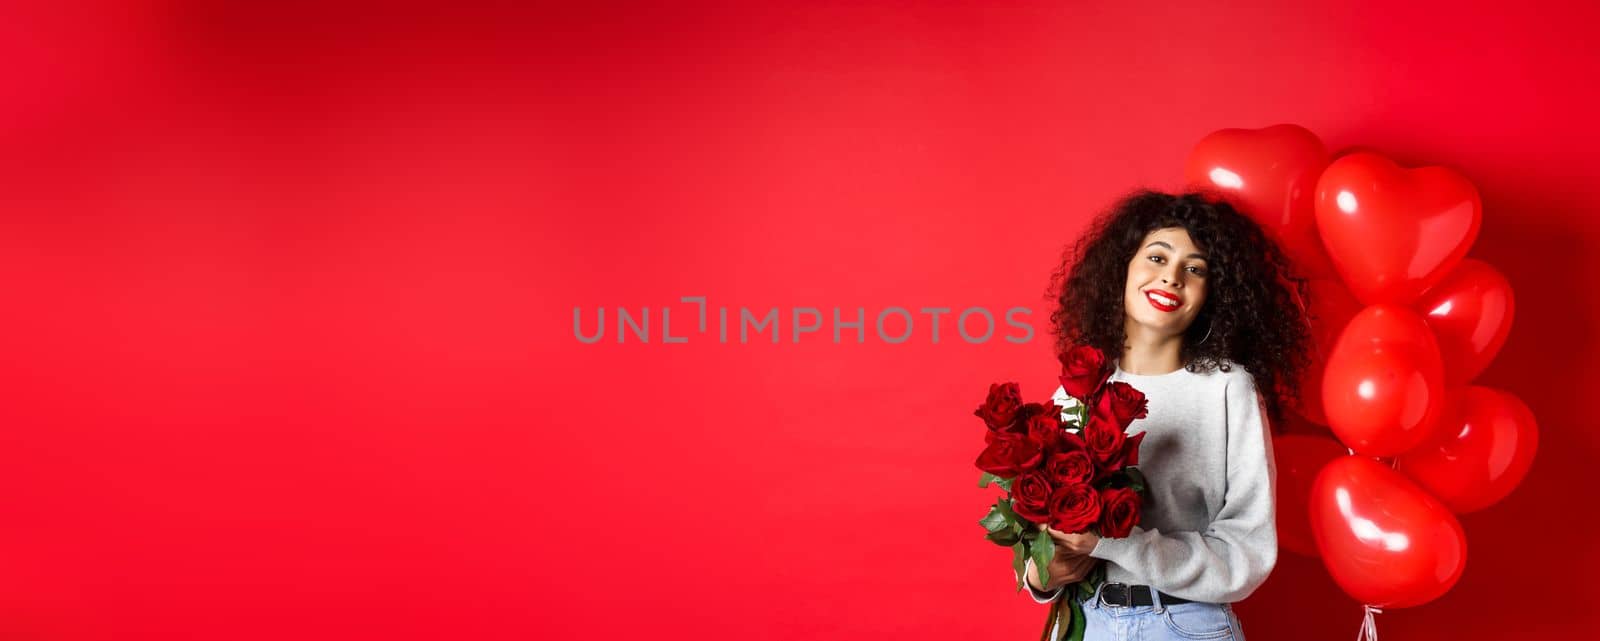 Holidays and celebration. Happy beautiful woman with curly hair, receive bouquet of roses and smiling, standing near party balloons, red background.